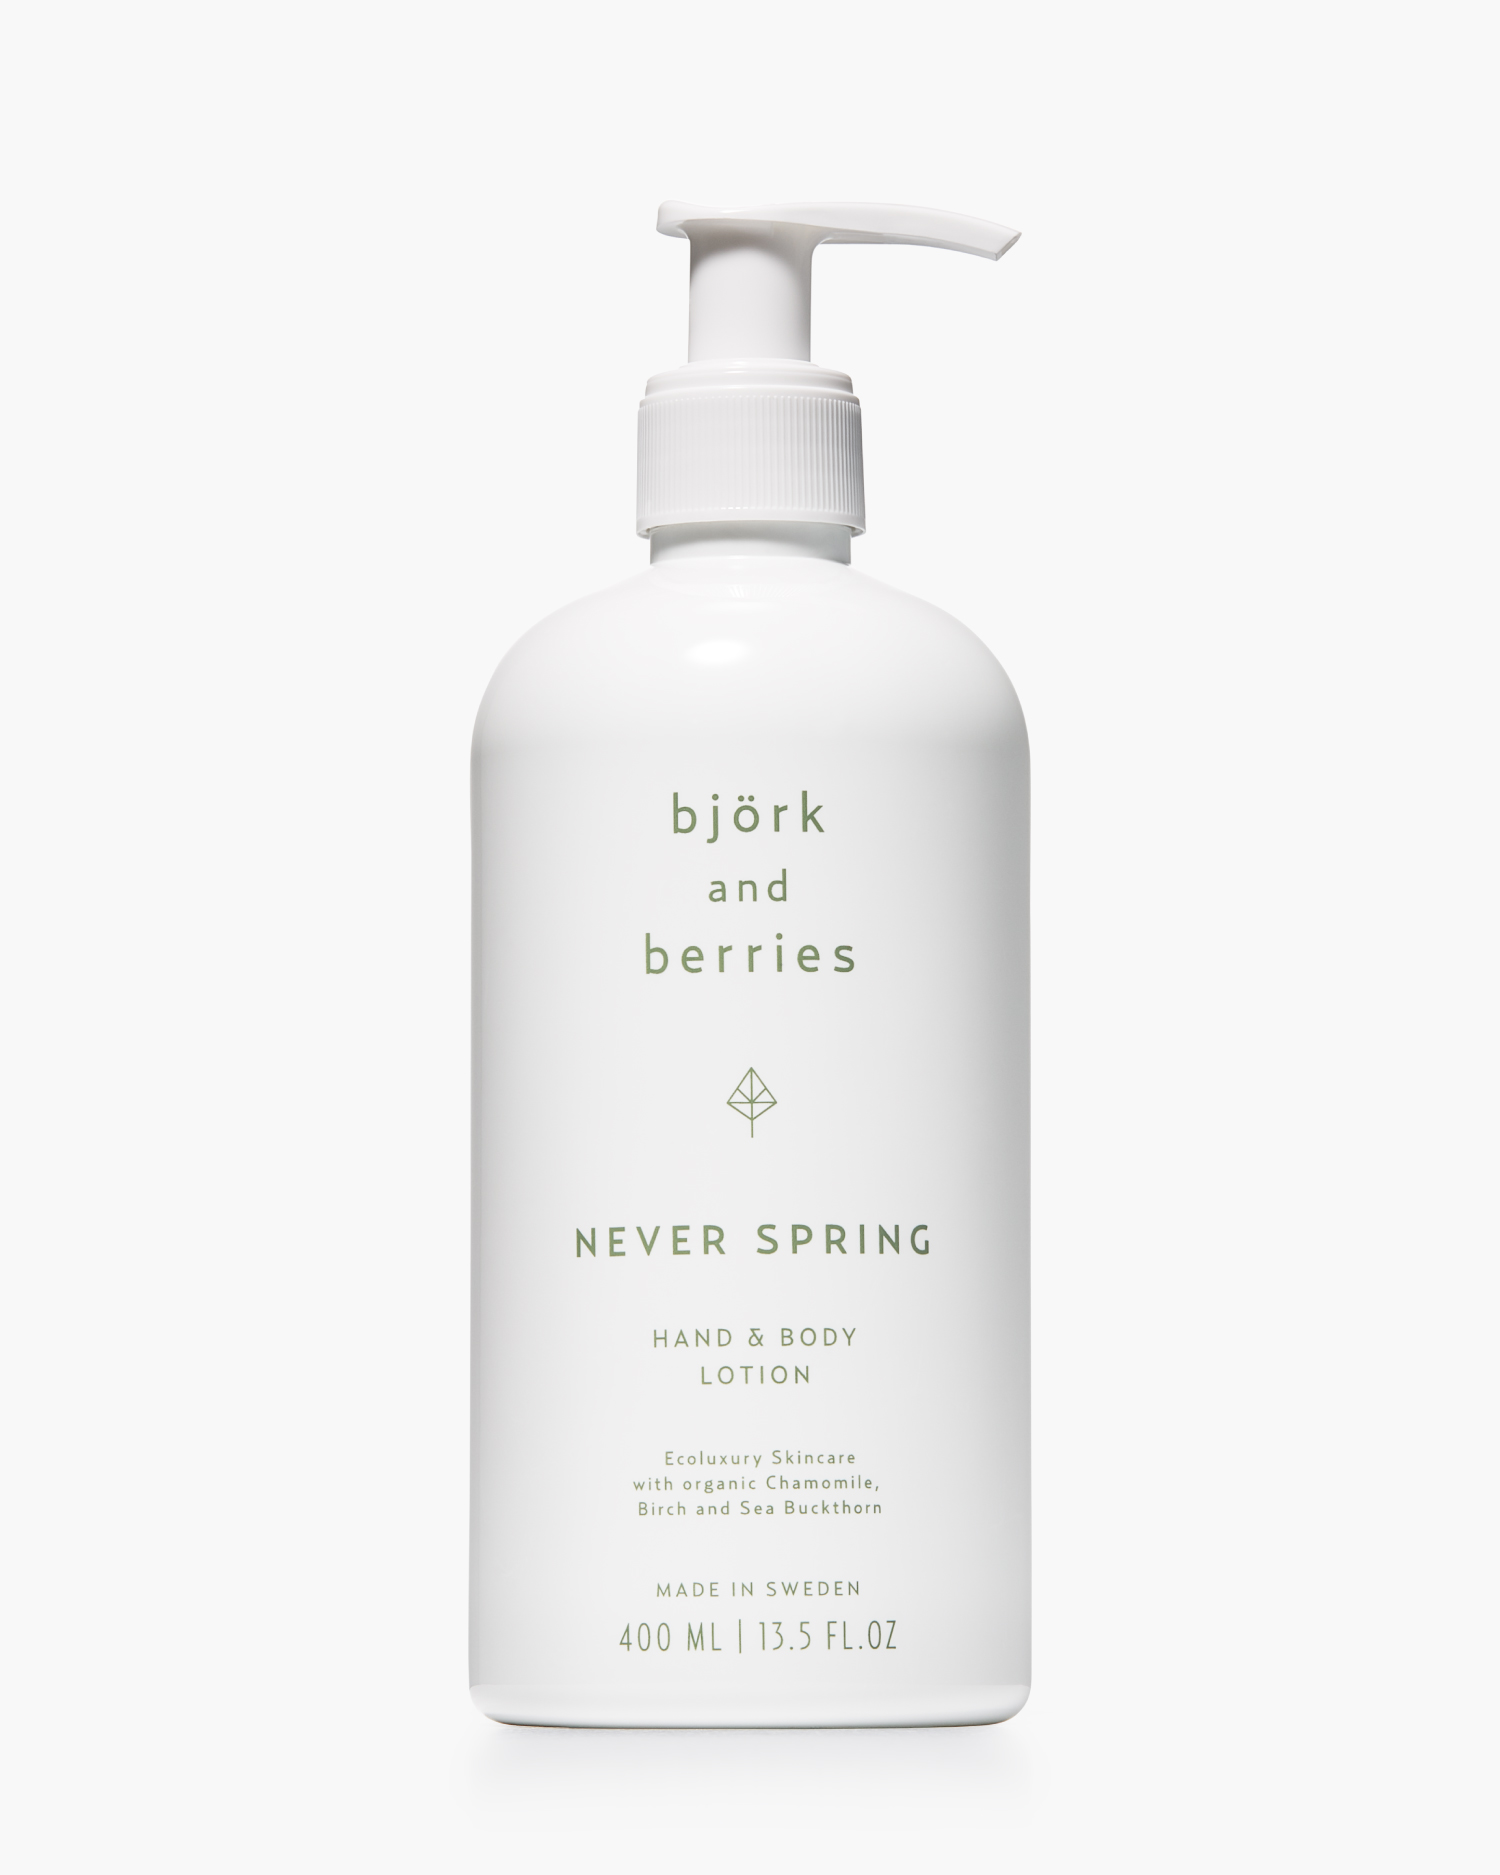 NEVER SPRING HAND & BODY LOTION 400ml